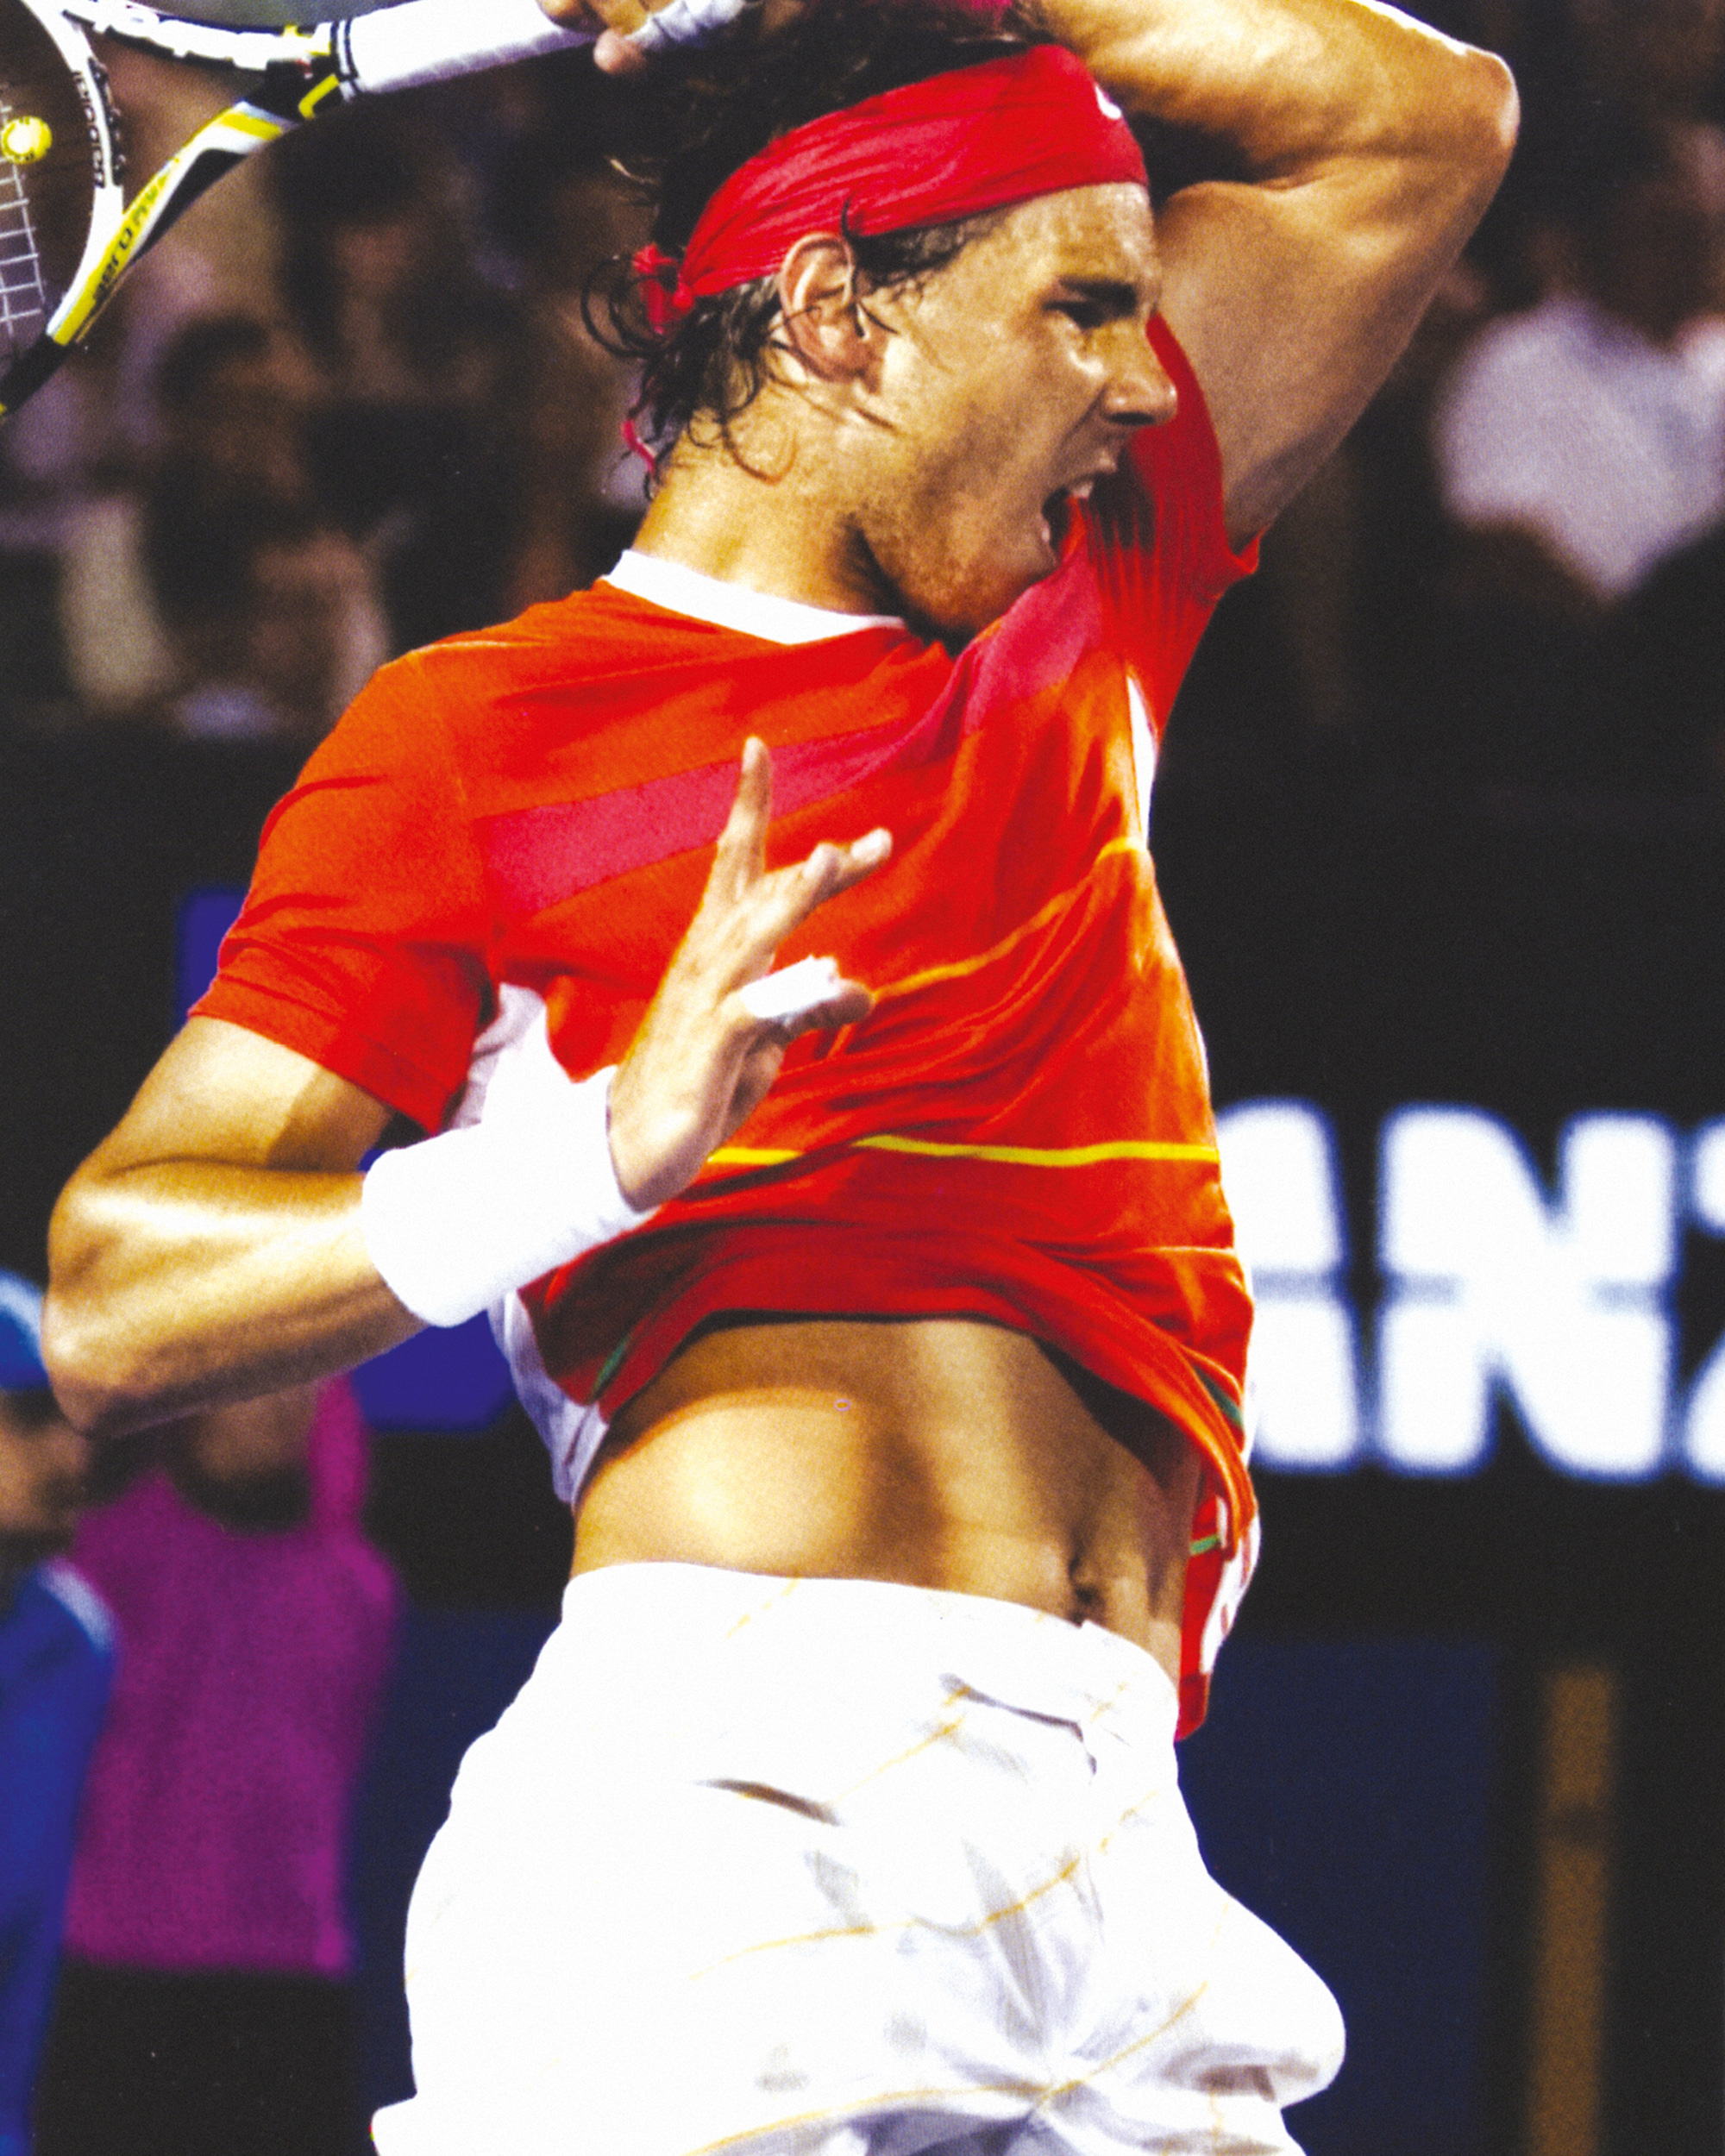 A photograph of Nadal unleashing his bullwhip forehand at the two thousand and ten Australian Open.